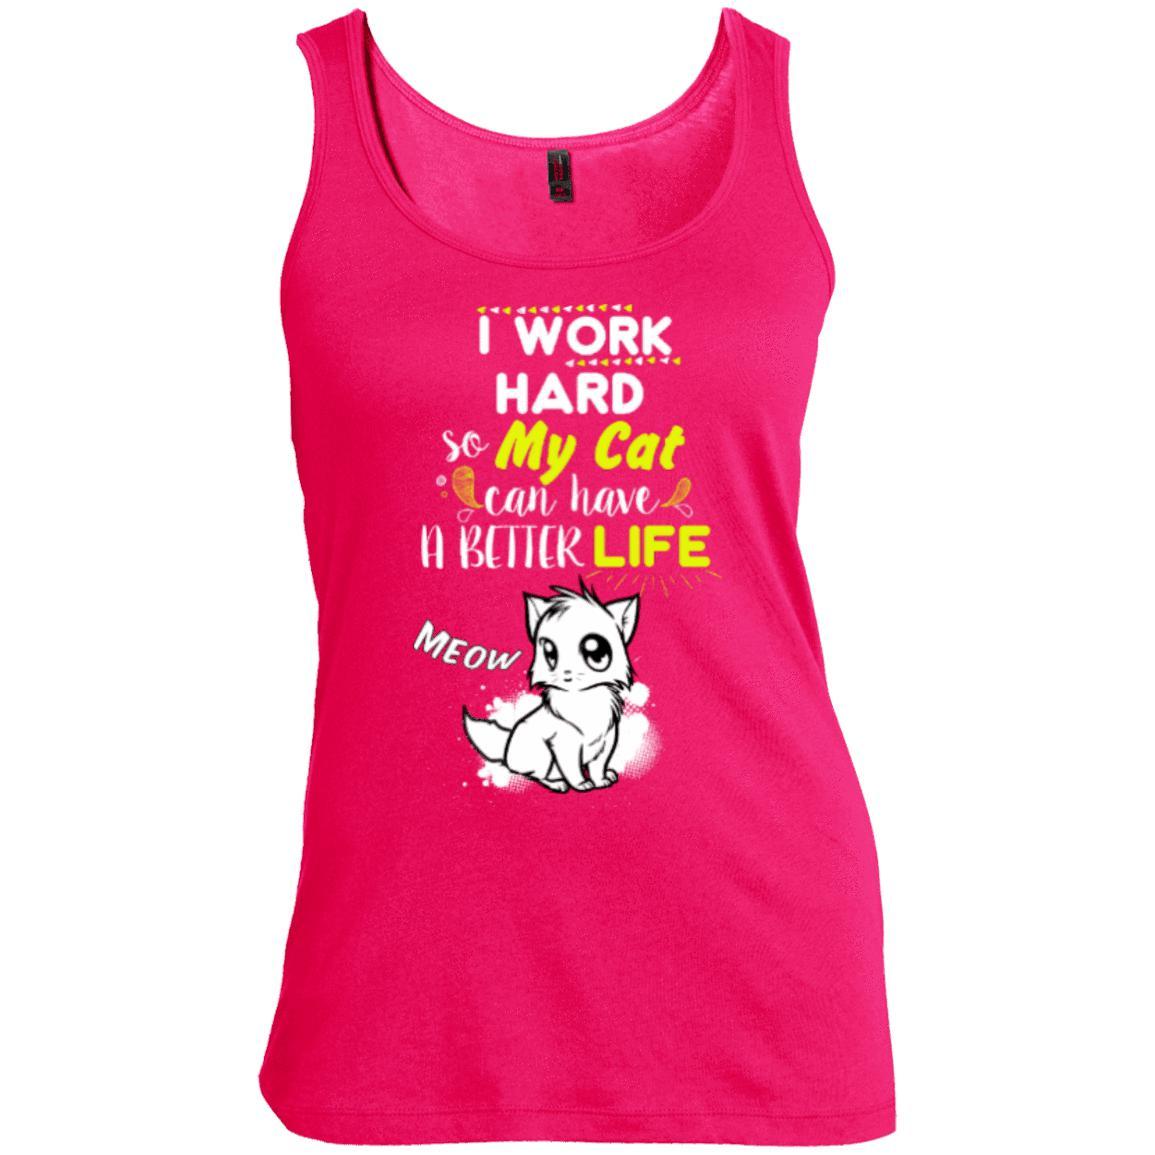 Cat Tee - I Work Hard So My Cat Can Have A Better Life - CatsForLife